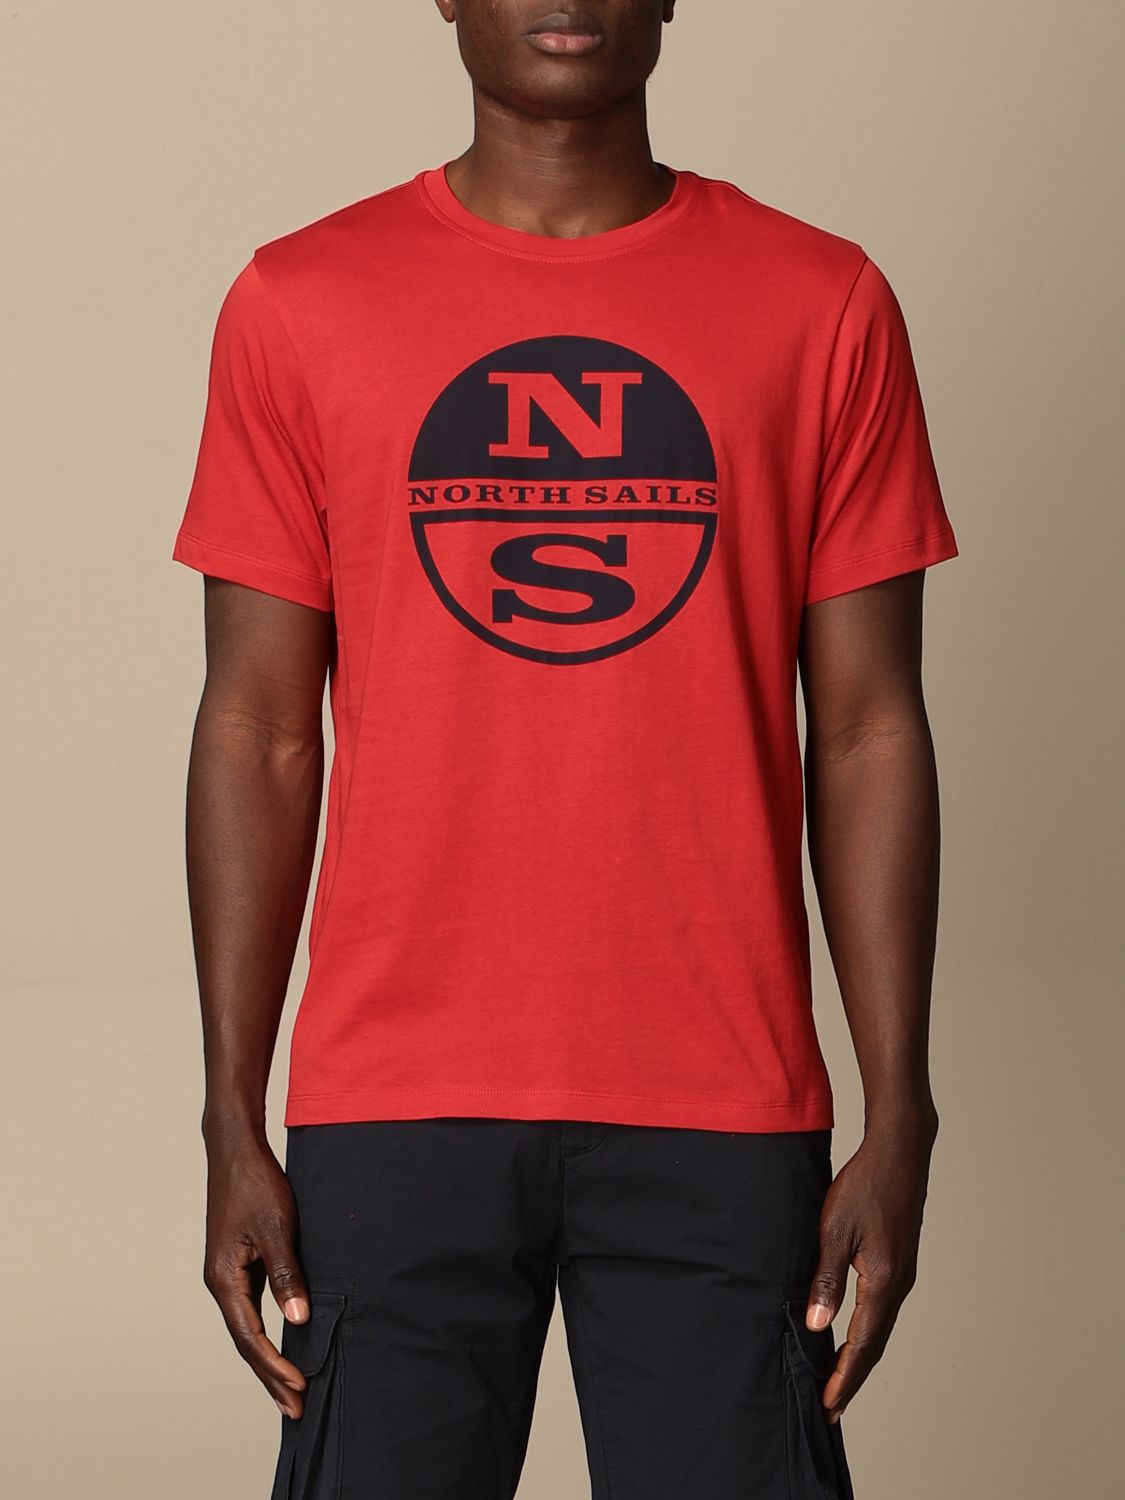 NORTH SAILS: cotton t-shirt with logo - Red | North Sails t-shirt ...